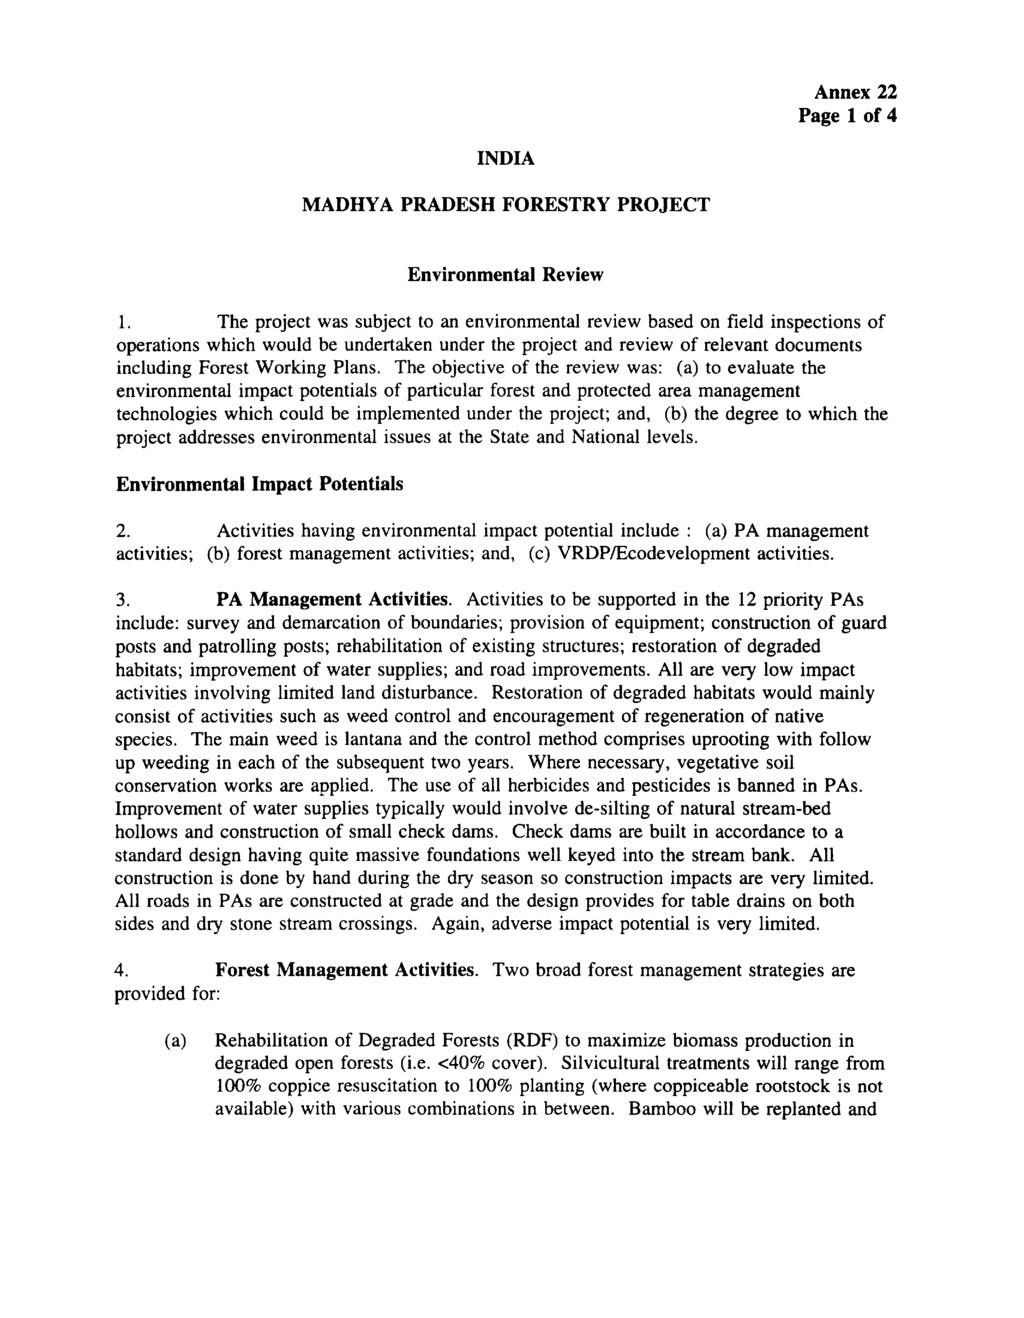 Annex 22 Page 1 of 4 INDIA MADHYA PRADESH FORESTRY PROJECT Environmental Review 1.